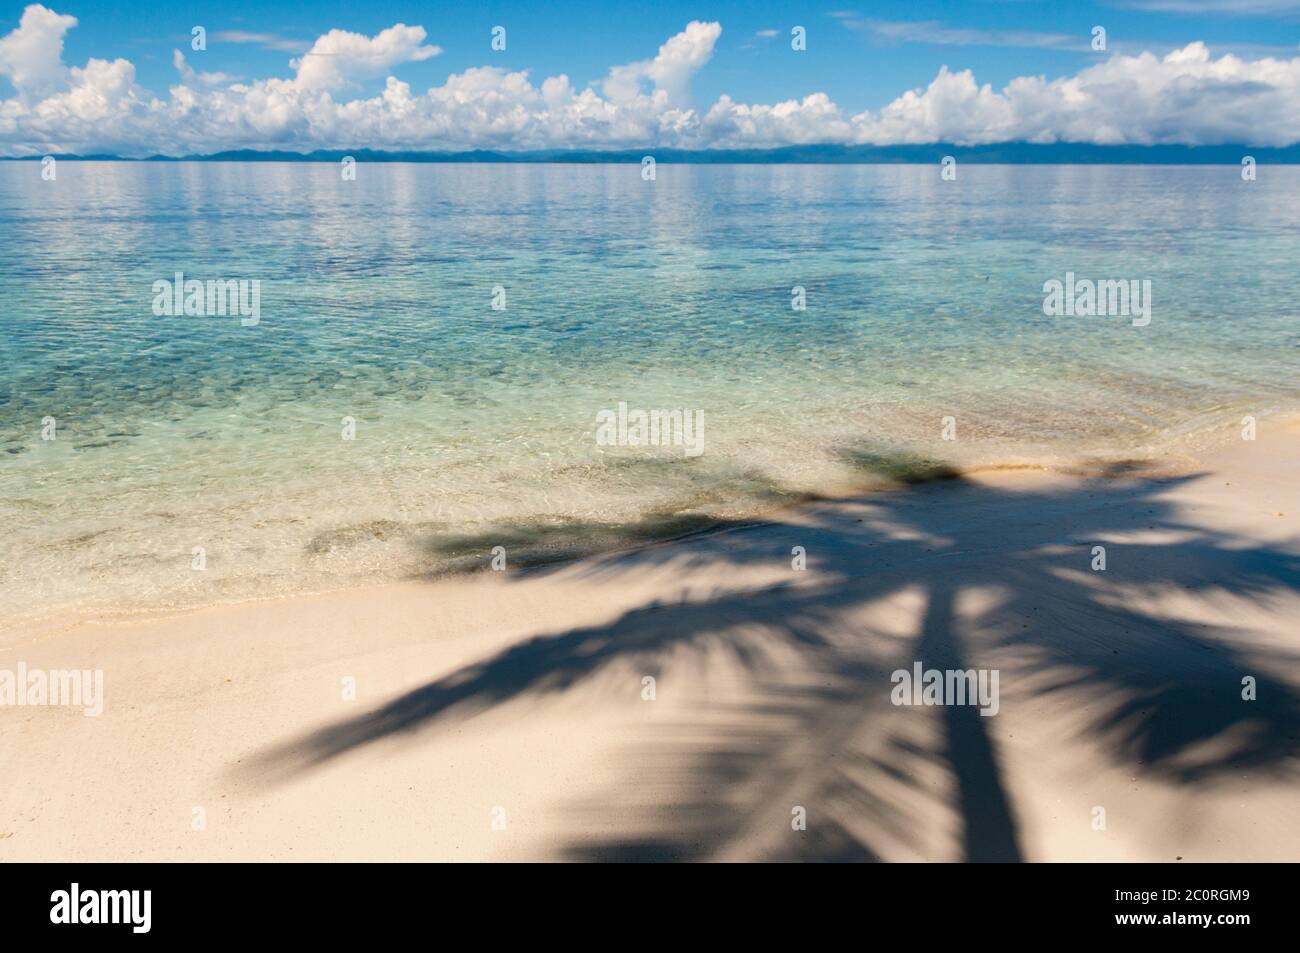 Shadow of a coconut tree on sand beach in front the ocean Stock Photo